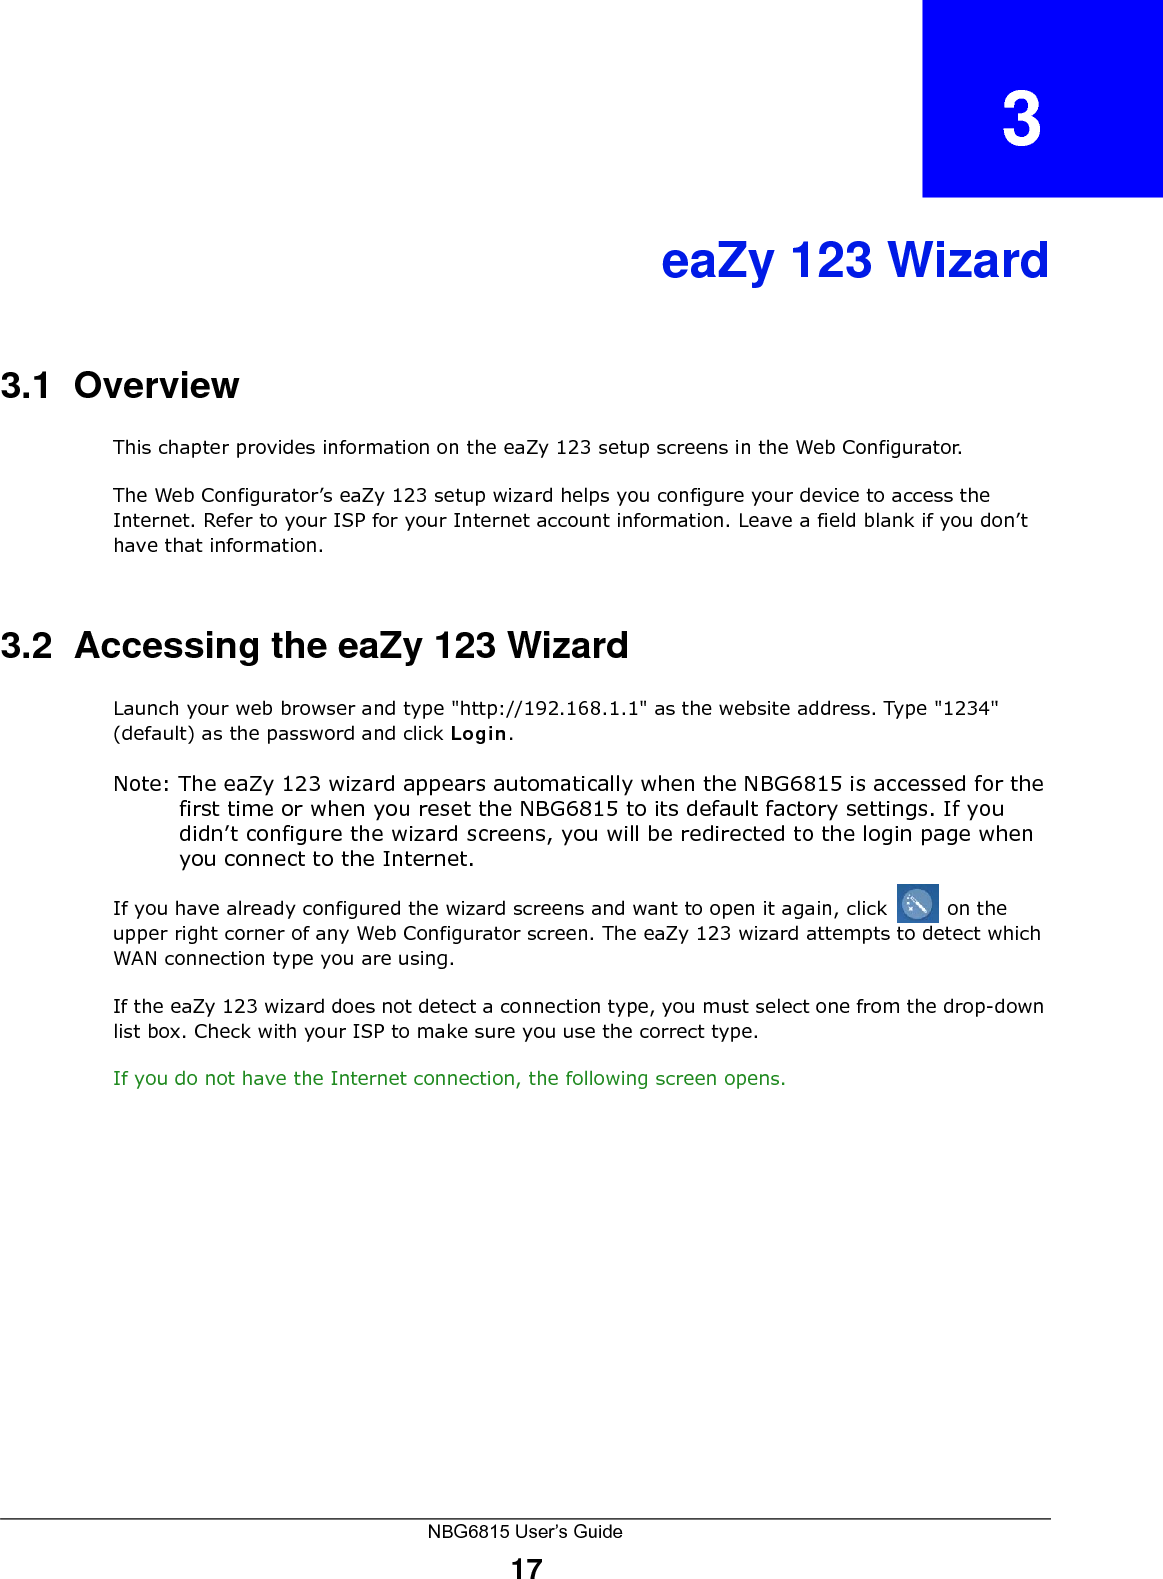 NBG6815 User’s Guide17CHAPTER   3eaZy 123 Wizard3.1  OverviewThis chapter provides information on the eaZy 123 setup screens in the Web Configurator.The Web Configurator’s eaZy 123 setup wizard helps you configure your device to access the Internet. Refer to your ISP for your Internet account information. Leave a field blank if you don’t have that information.3.2  Accessing the eaZy 123 WizardLaunch your web browser and type &quot;http://192.168.1.1&quot; as the website address. Type &quot;1234&quot; (default) as the password and click Login.Note: The eaZy 123 wizard appears automatically when the NBG6815 is accessed for the first time or when you reset the NBG6815 to its default factory settings. If you didn’t configure the wizard screens, you will be redirected to the login page when you connect to the Internet.If you have already configured the wizard screens and want to open it again, click   on the upper right corner of any Web Configurator screen. The eaZy 123 wizard attempts to detect which WAN connection type you are using. If the eaZy 123 wizard does not detect a connection type, you must select one from the drop-down list box. Check with your ISP to make sure you use the correct type.If you do not have the Internet connection, the following screen opens.